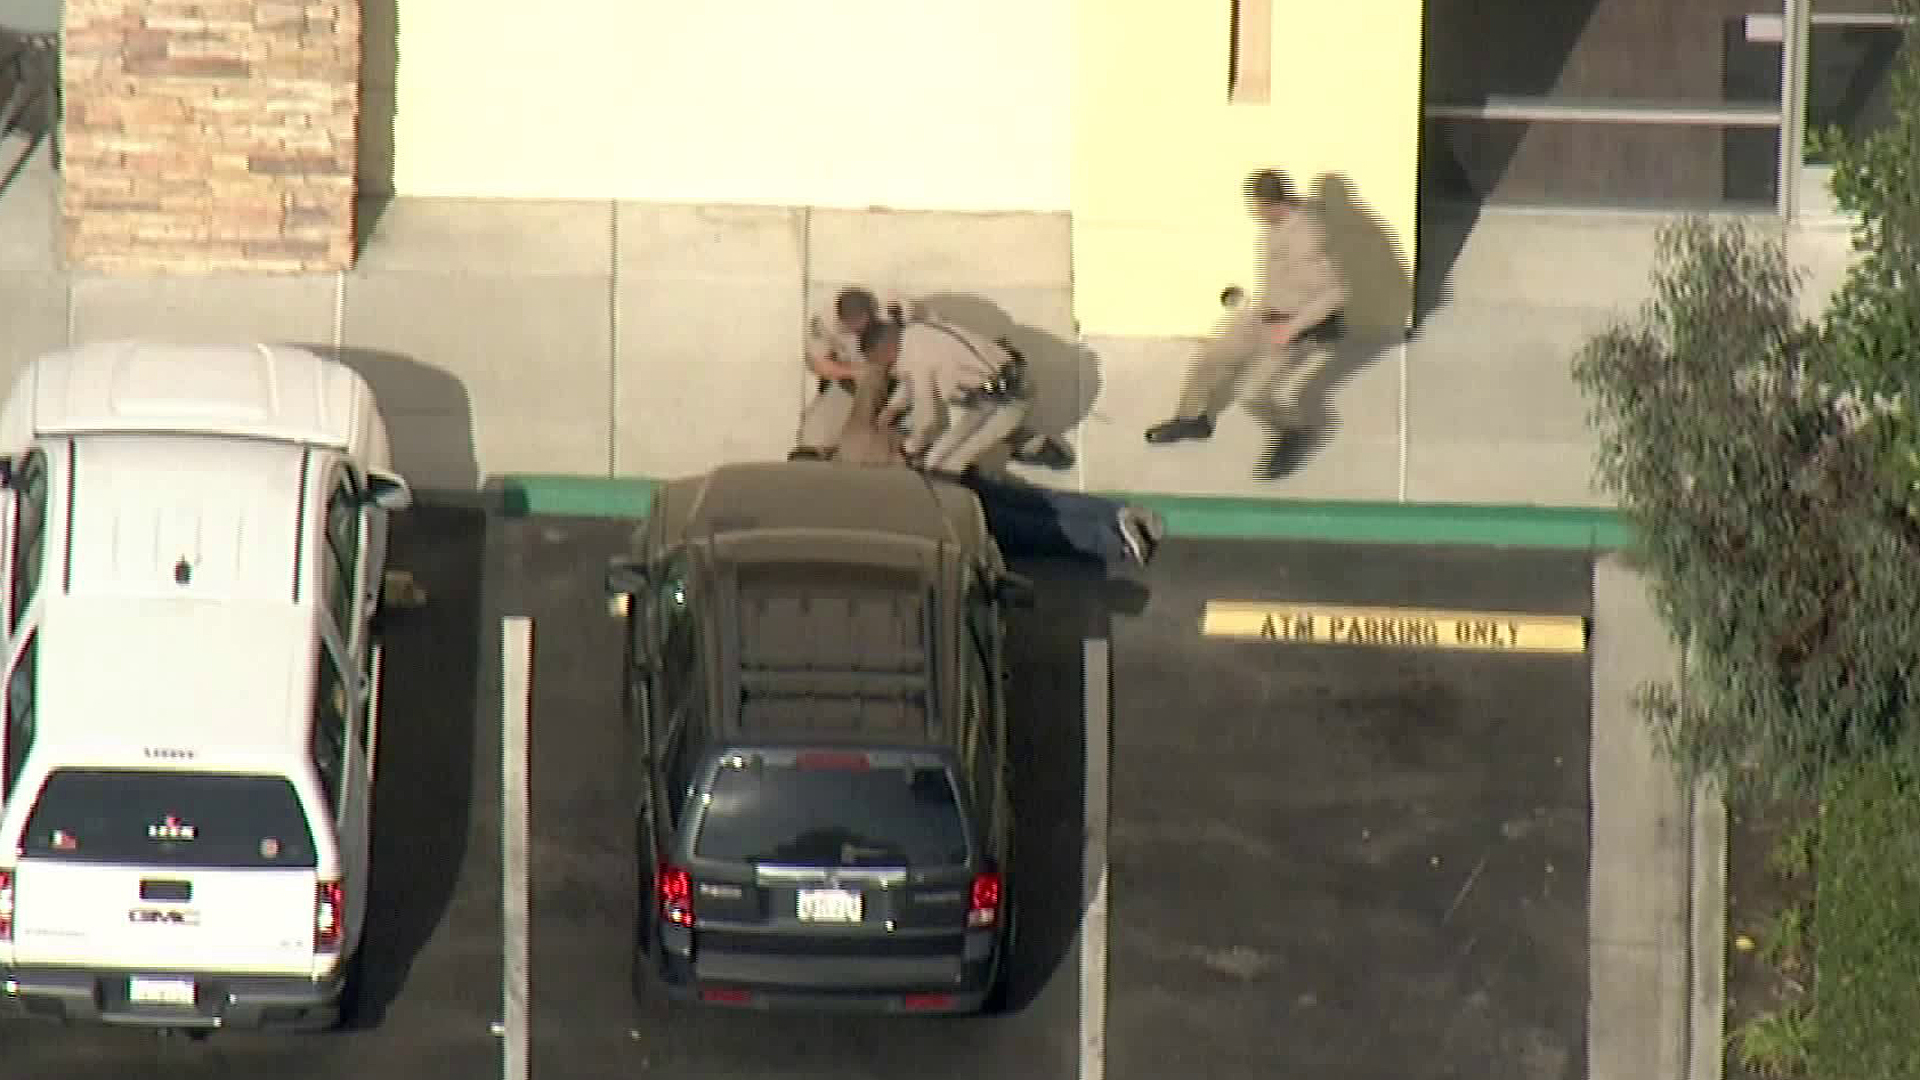 A man is in custody after a pursuit ends in Seal Beach on Nov. 16, 2018. (Credit: KTLA)